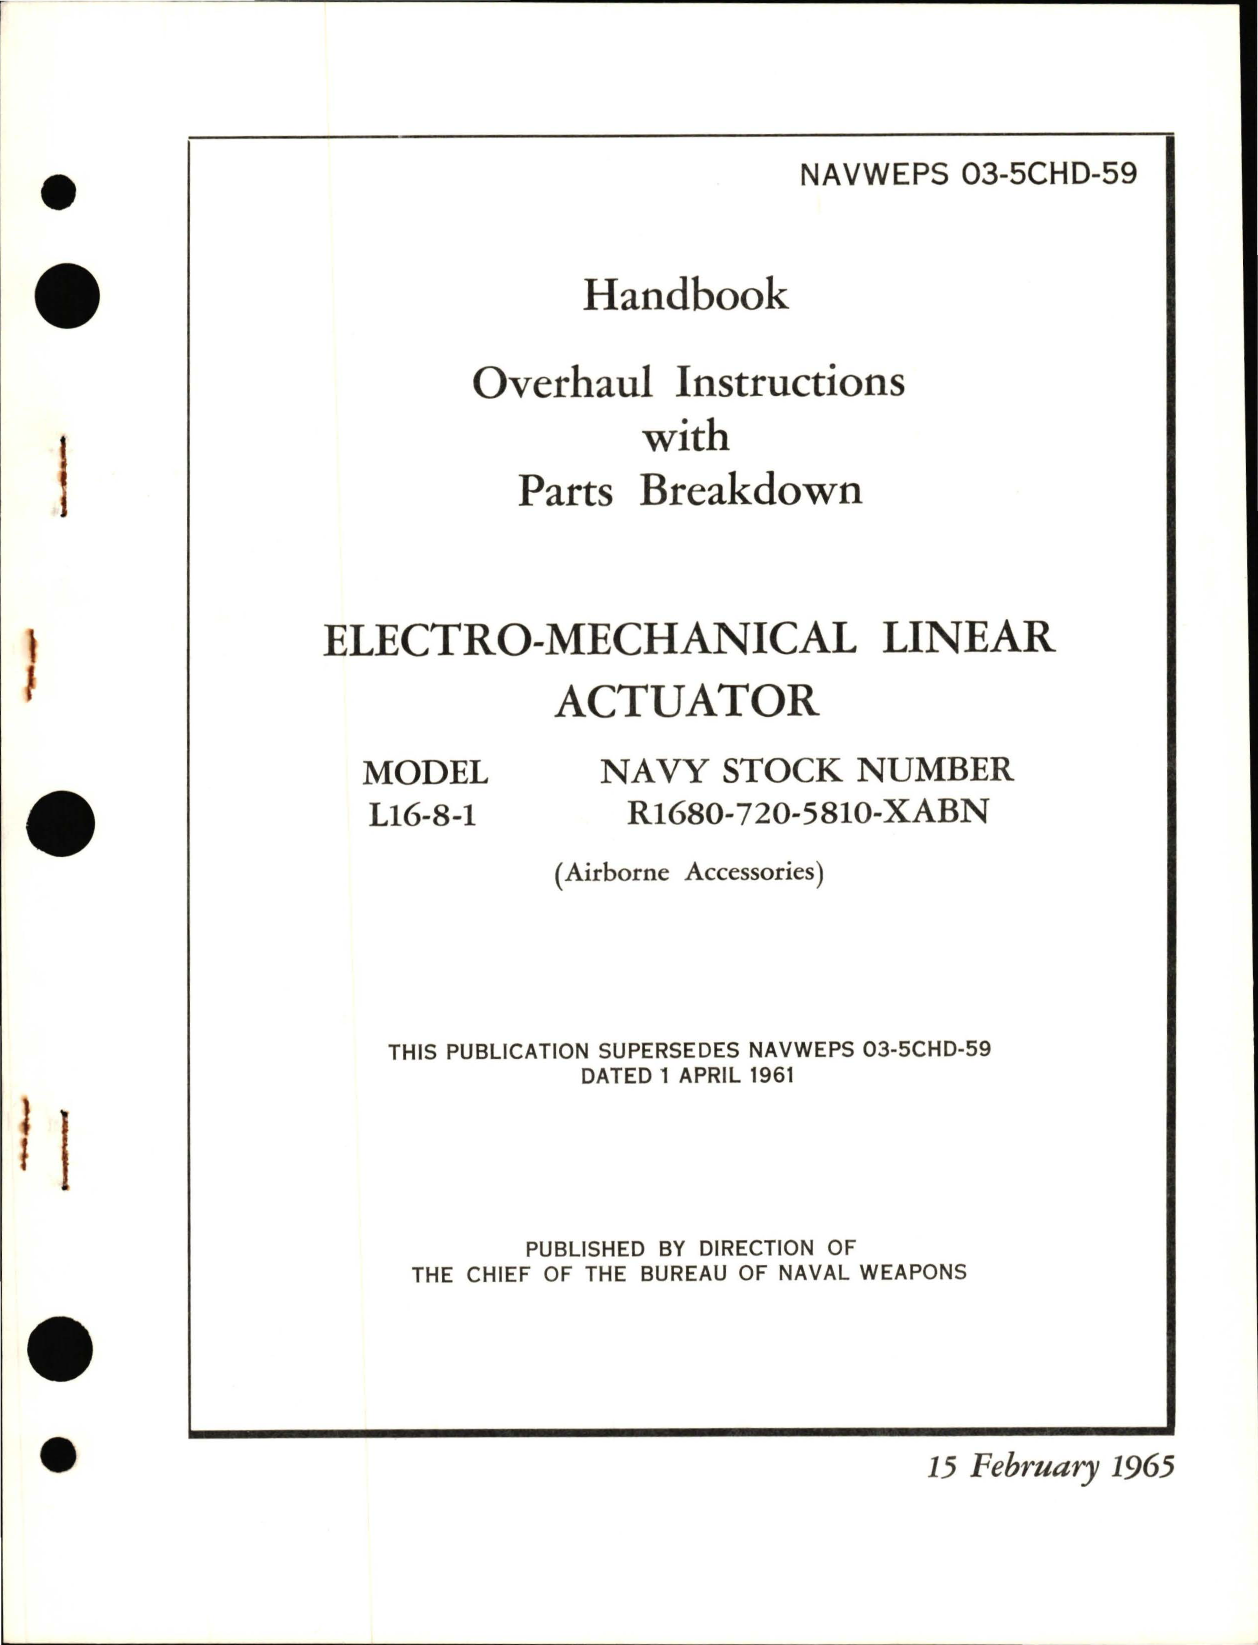 Sample page 1 from AirCorps Library document: Overhaul Instructions with Parts Breakdown for Electro-Mechanical Linear Actuator Model L16-8-1 and R1680-720-5810-XABN